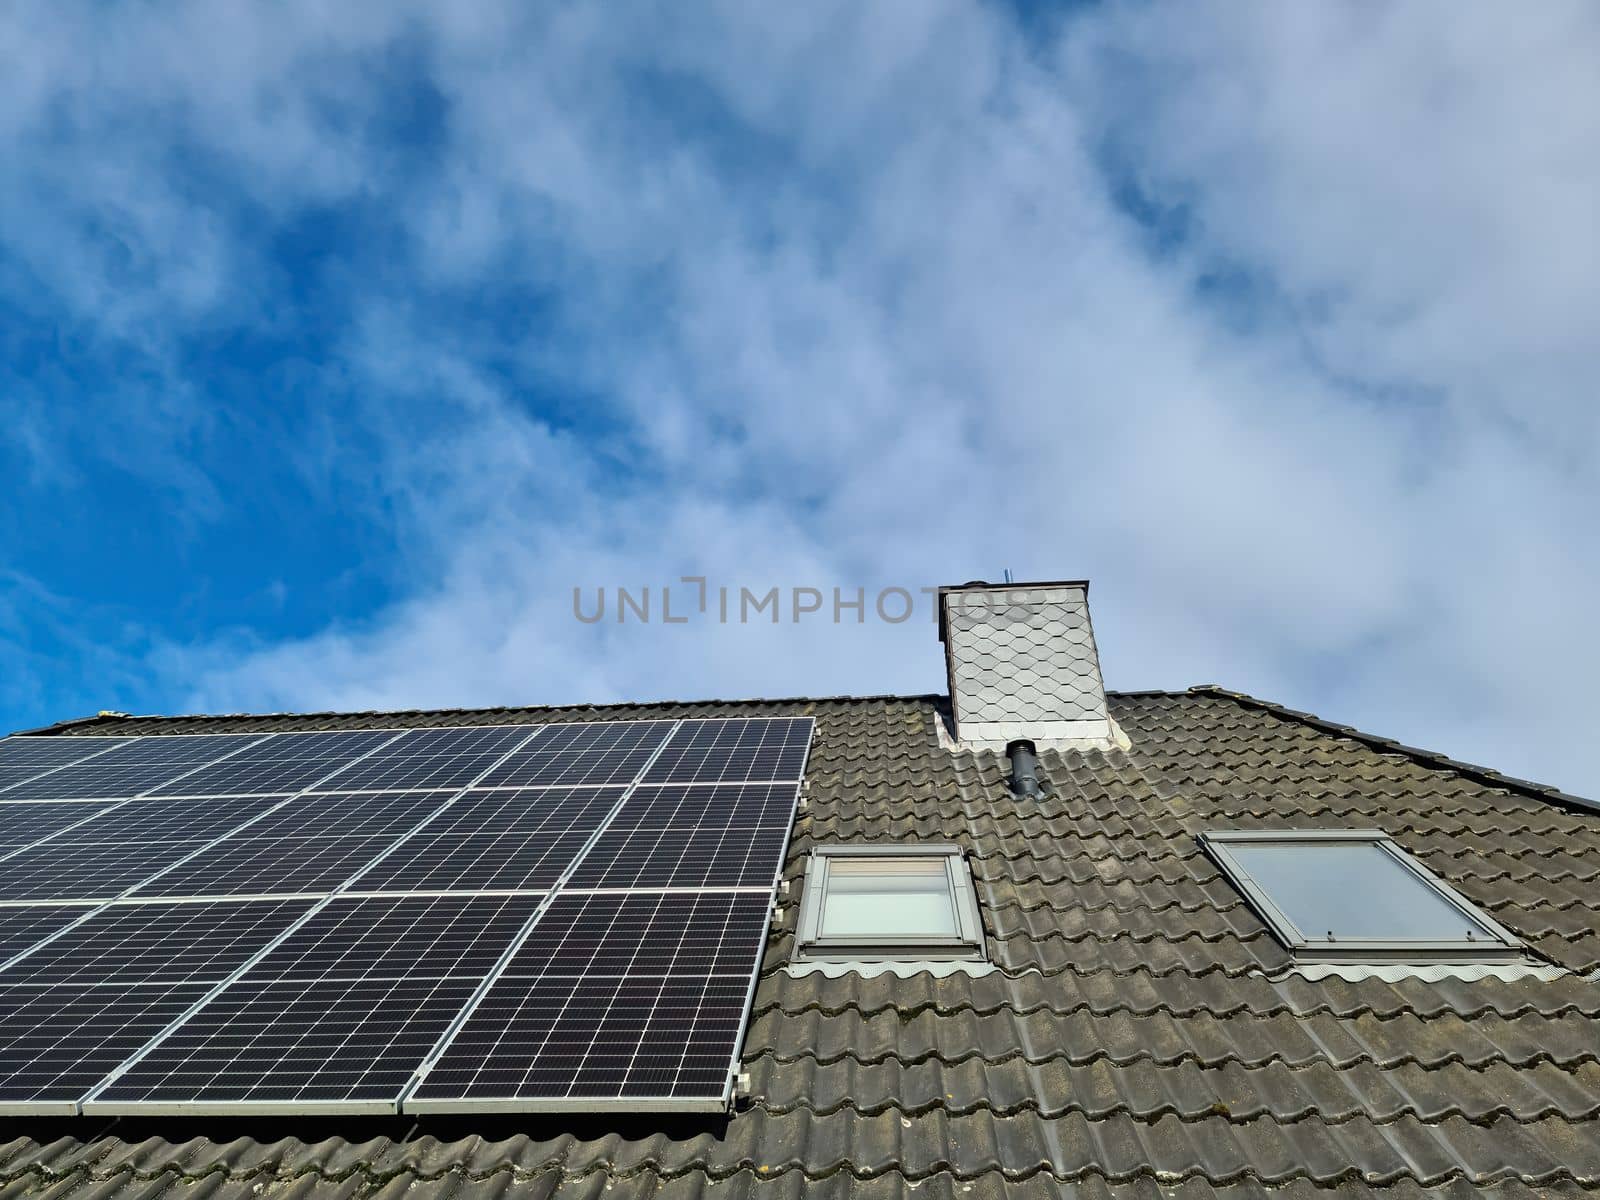 Solar panels producing clean energy on a roof of a residential house in Germany by MP_foto71